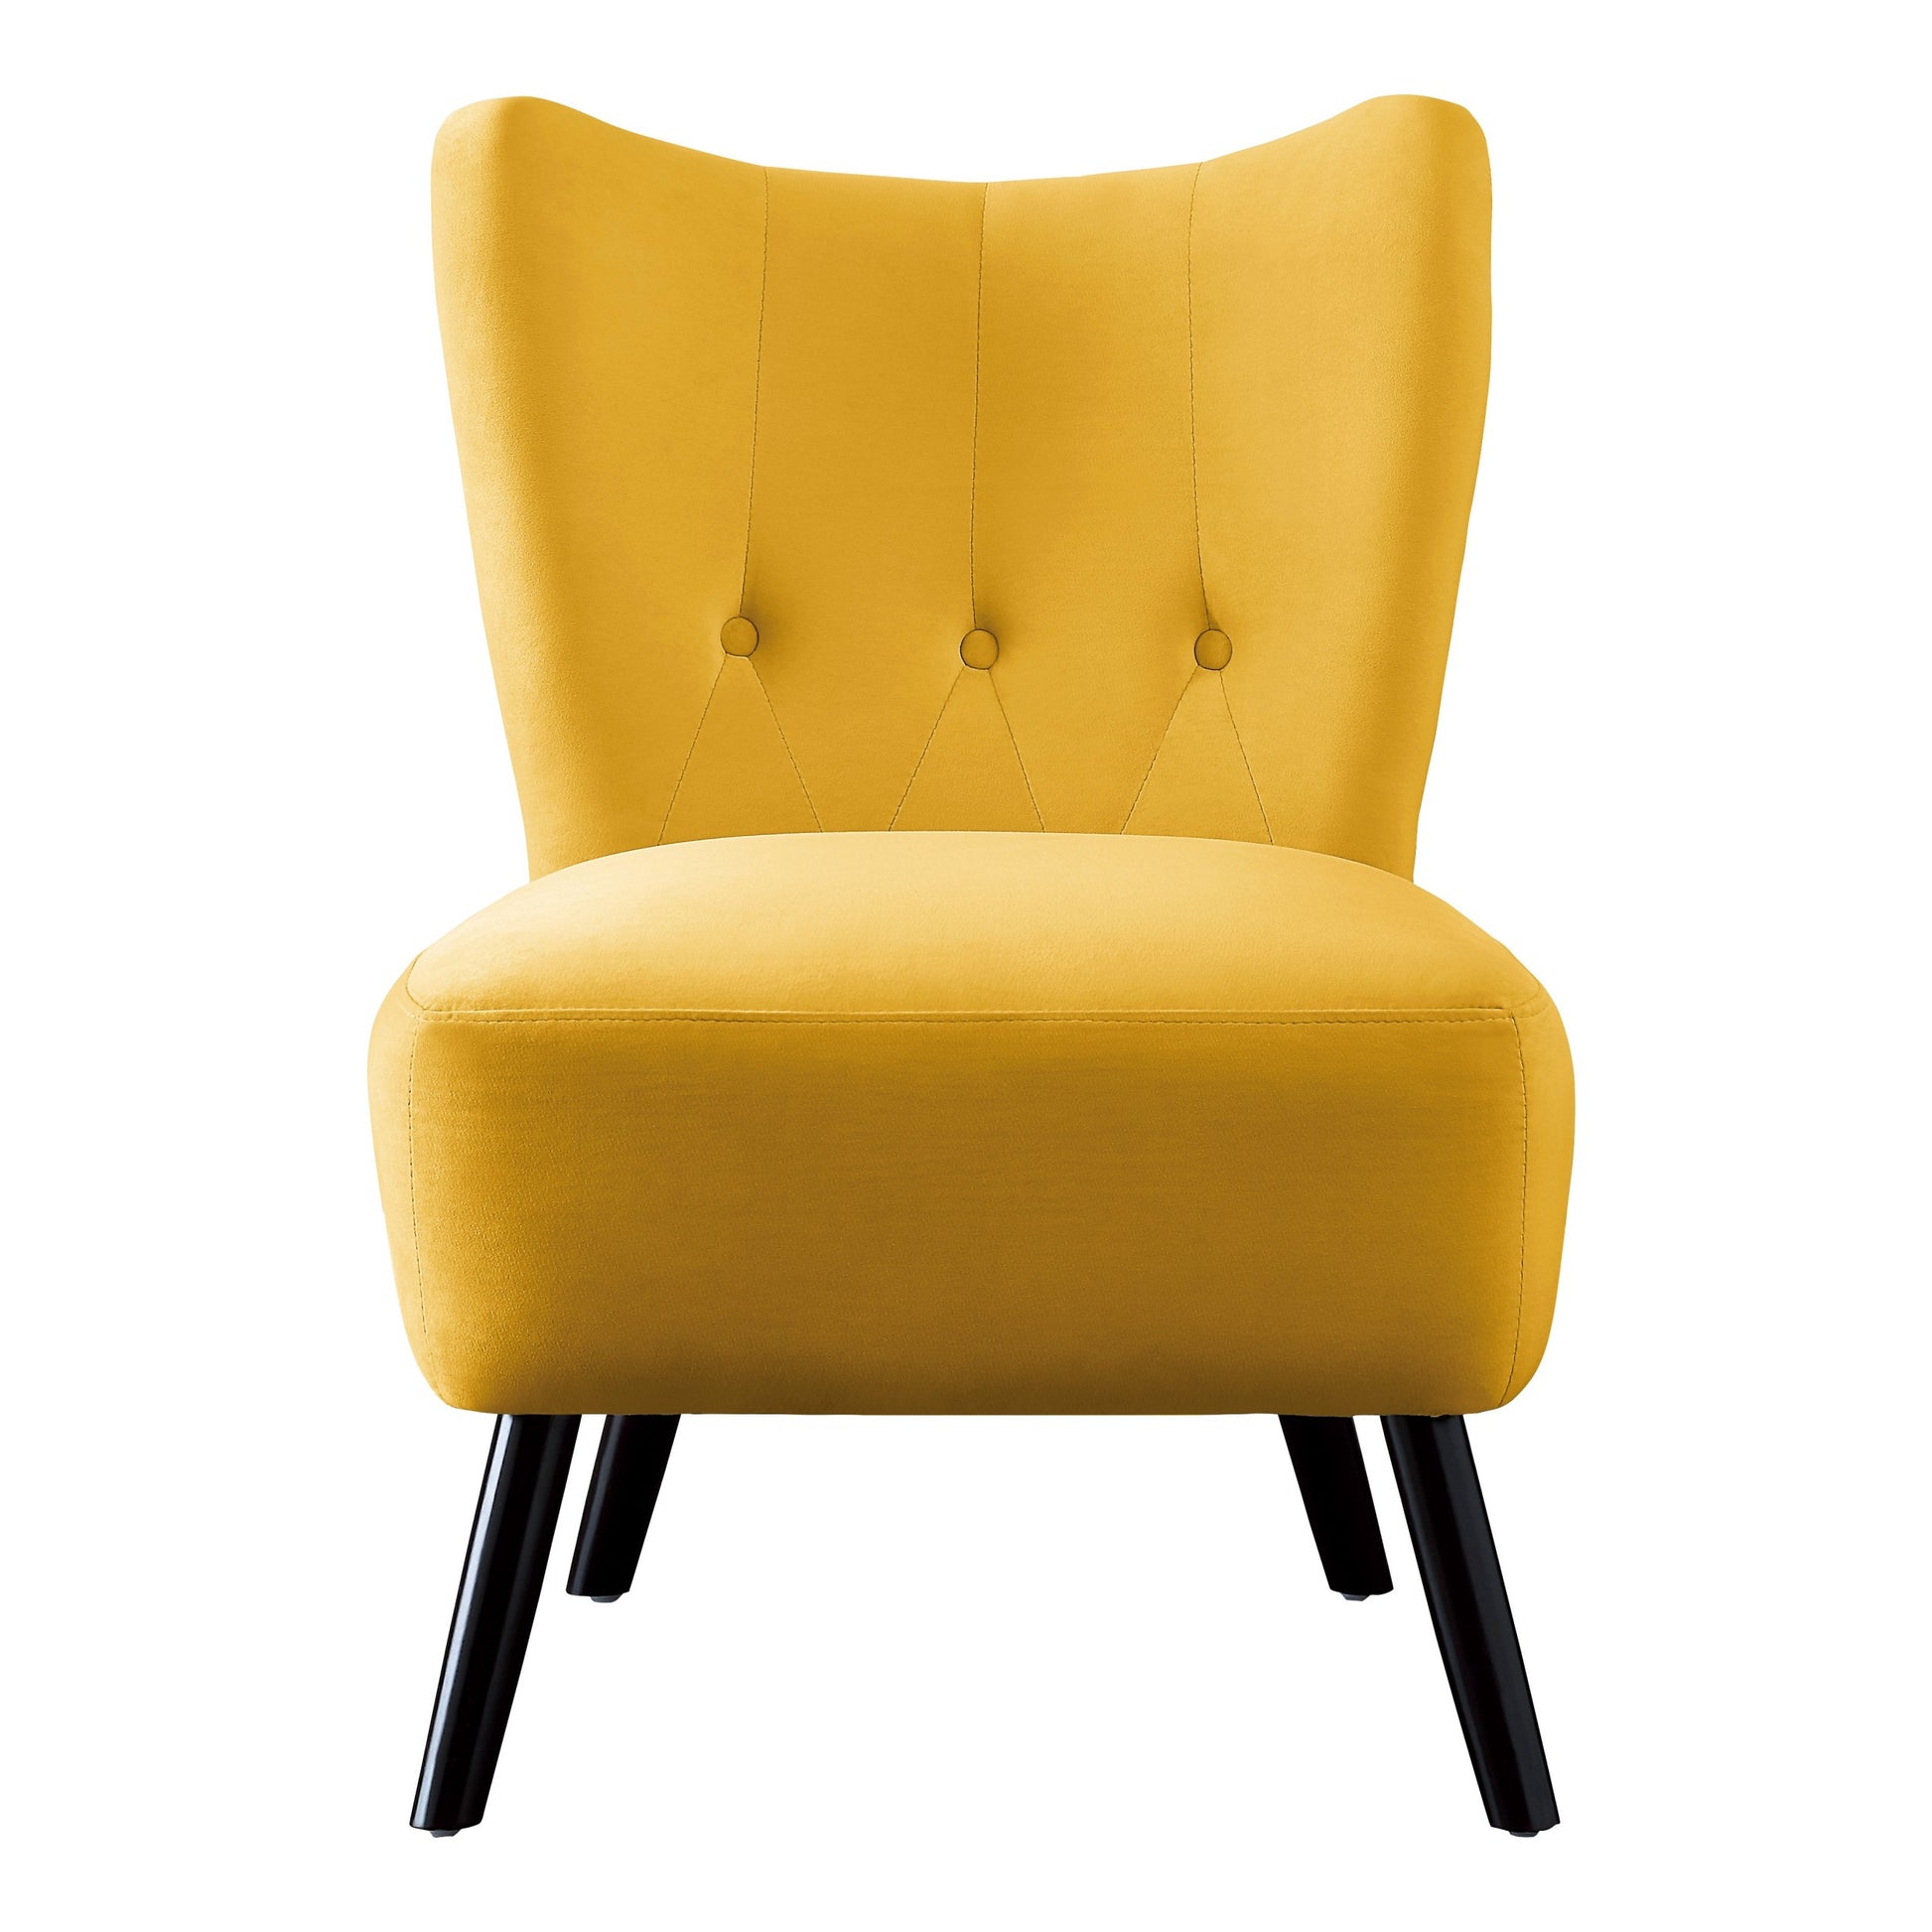 Unique Style Accent Chair Yellow Velvet Covering yellow-primary living space-modern-retro-solid